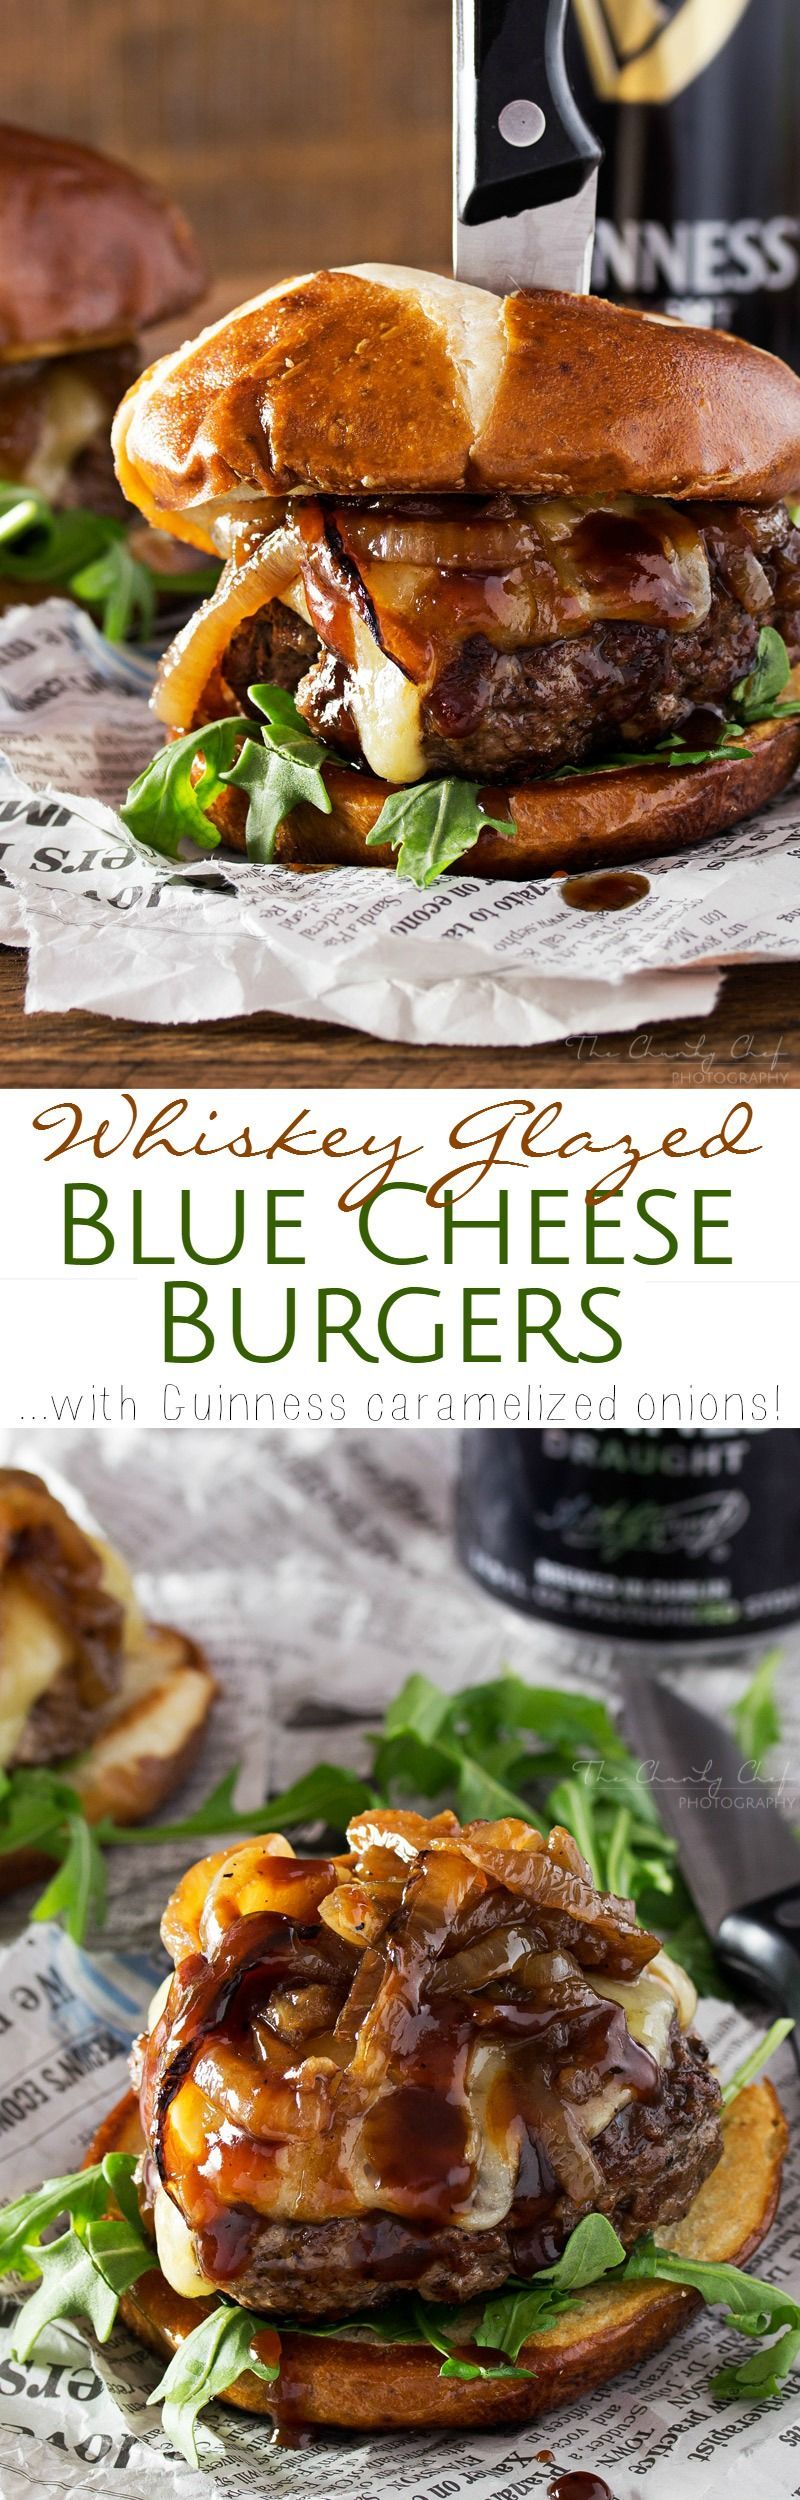 Whiskey-Glazed-Blue-Cheese-Burgers | These blue cheese burgers are brushed with a homemade whiskey gla